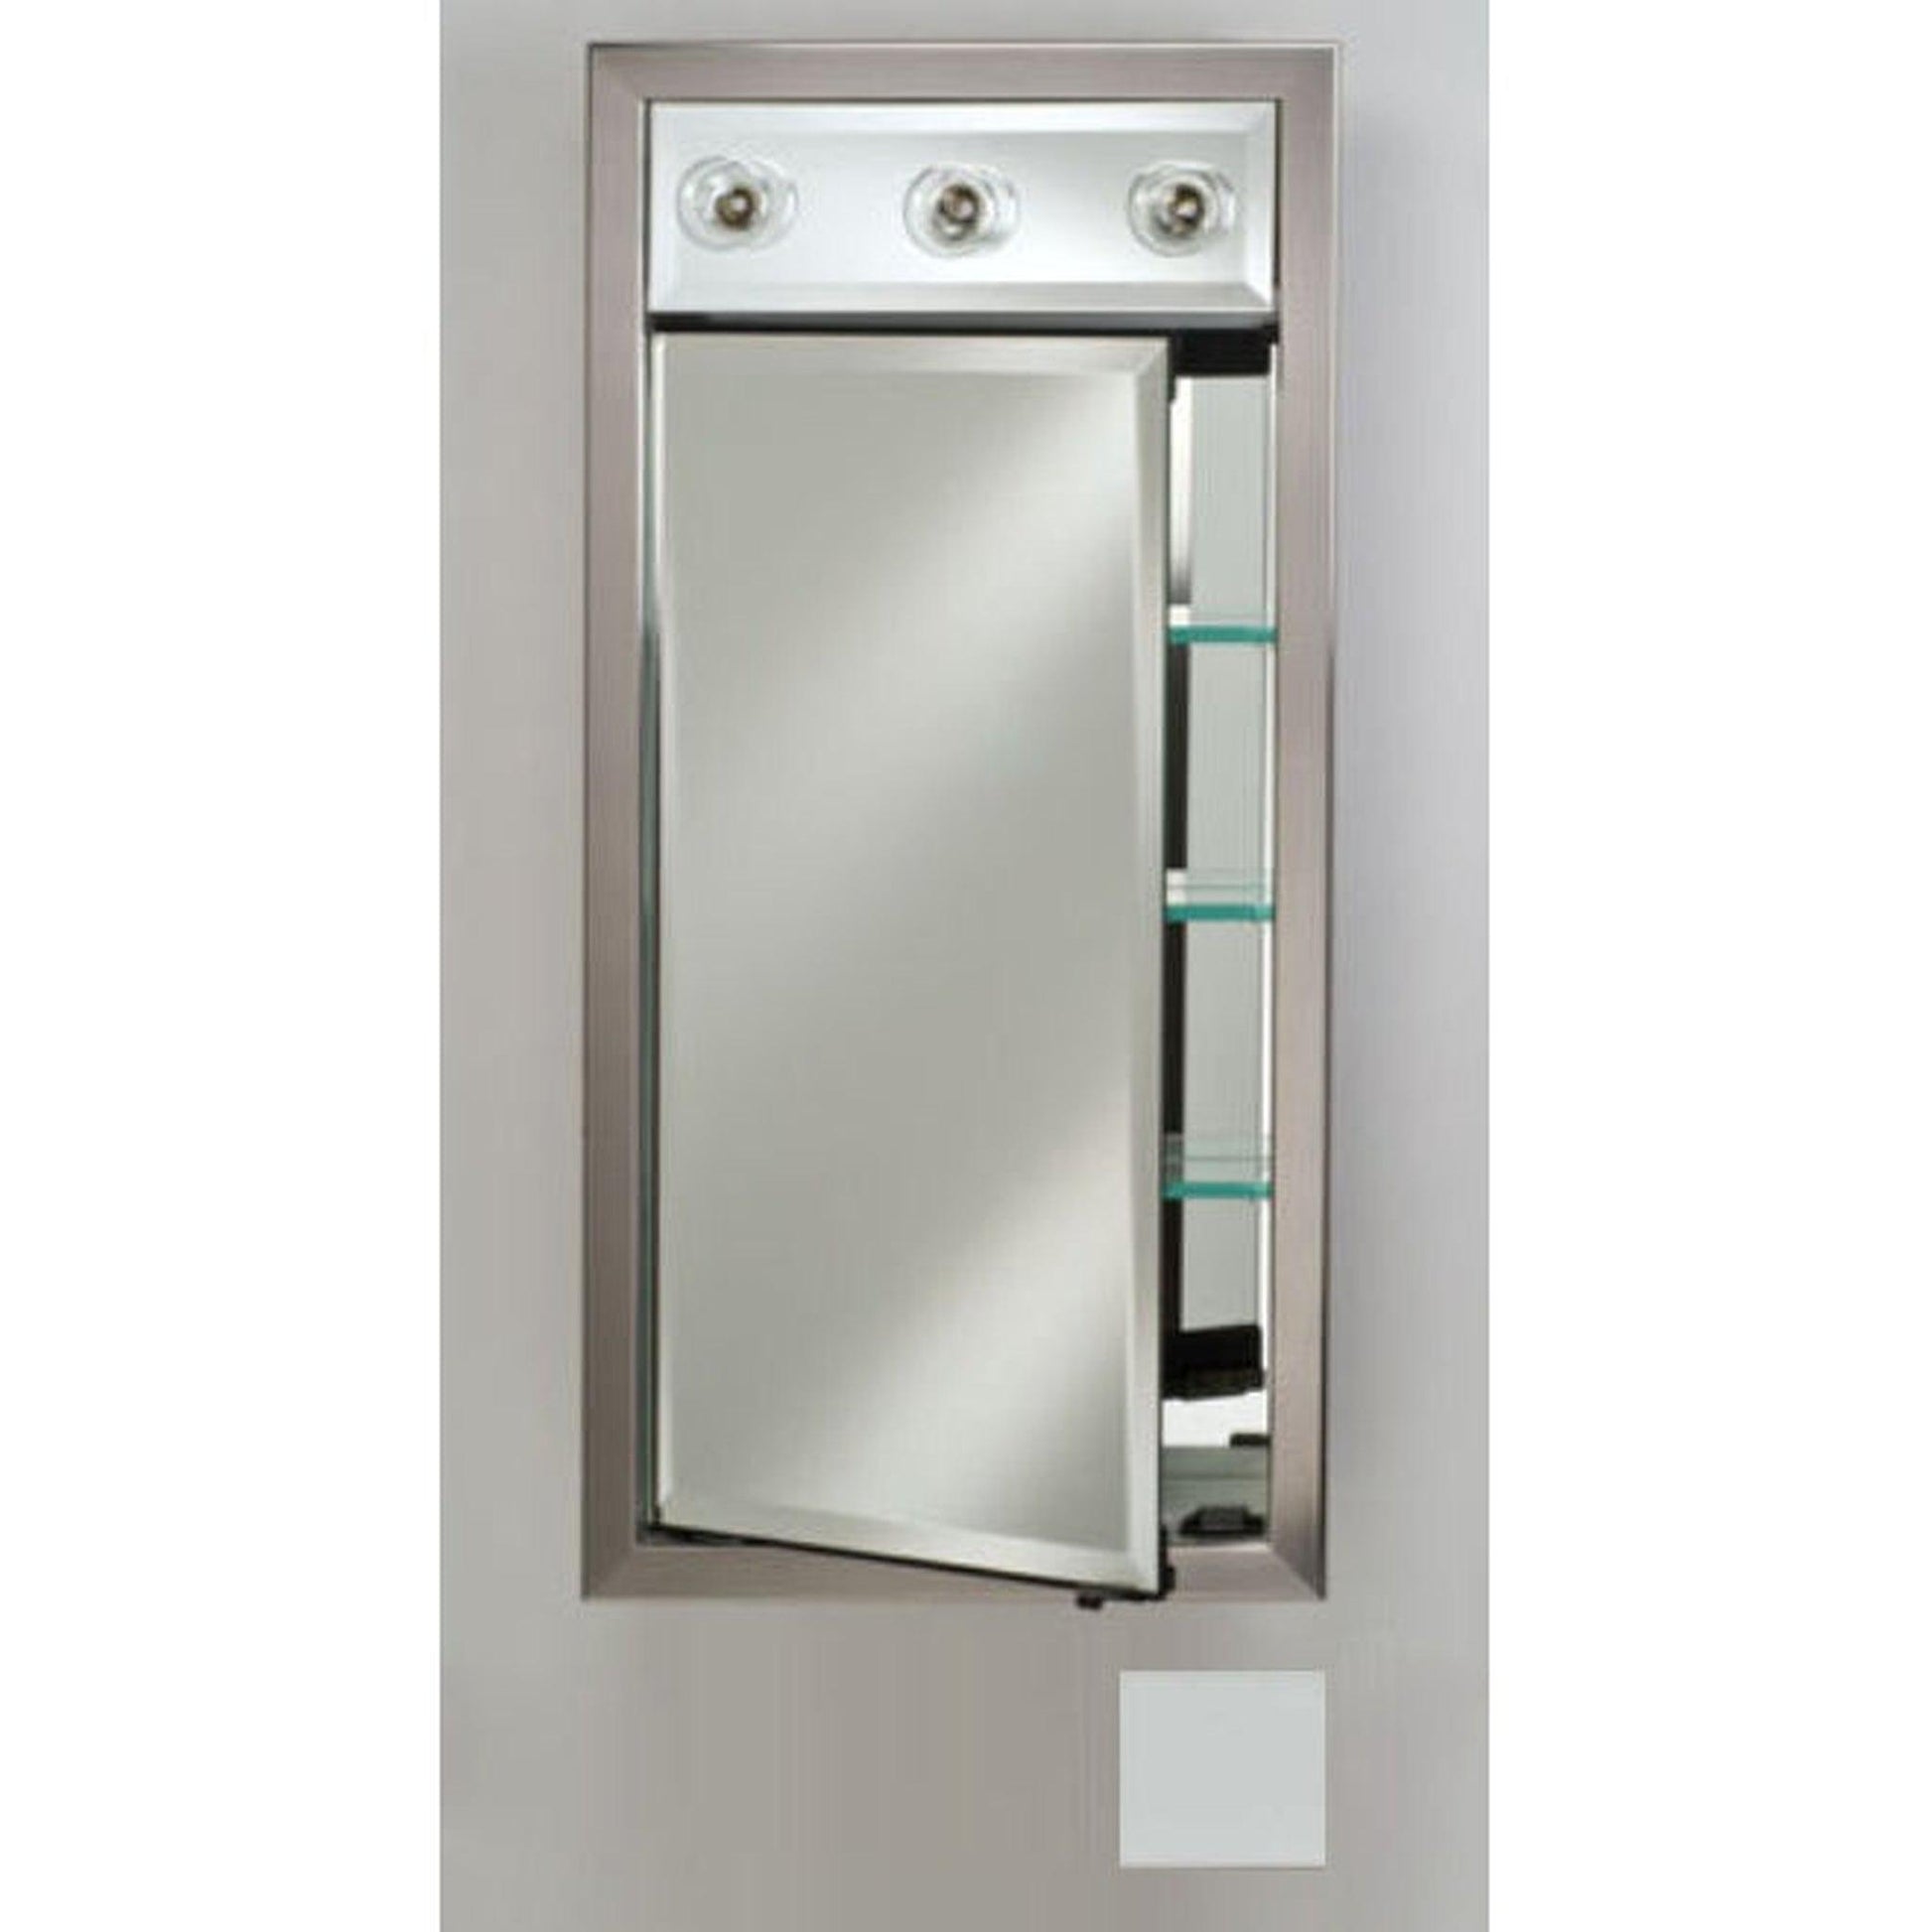 Afina Signature 17" x 40" Soho Satin White Recessed Right Hinged Single Door Medicine Cabinet With Contemporary Lights